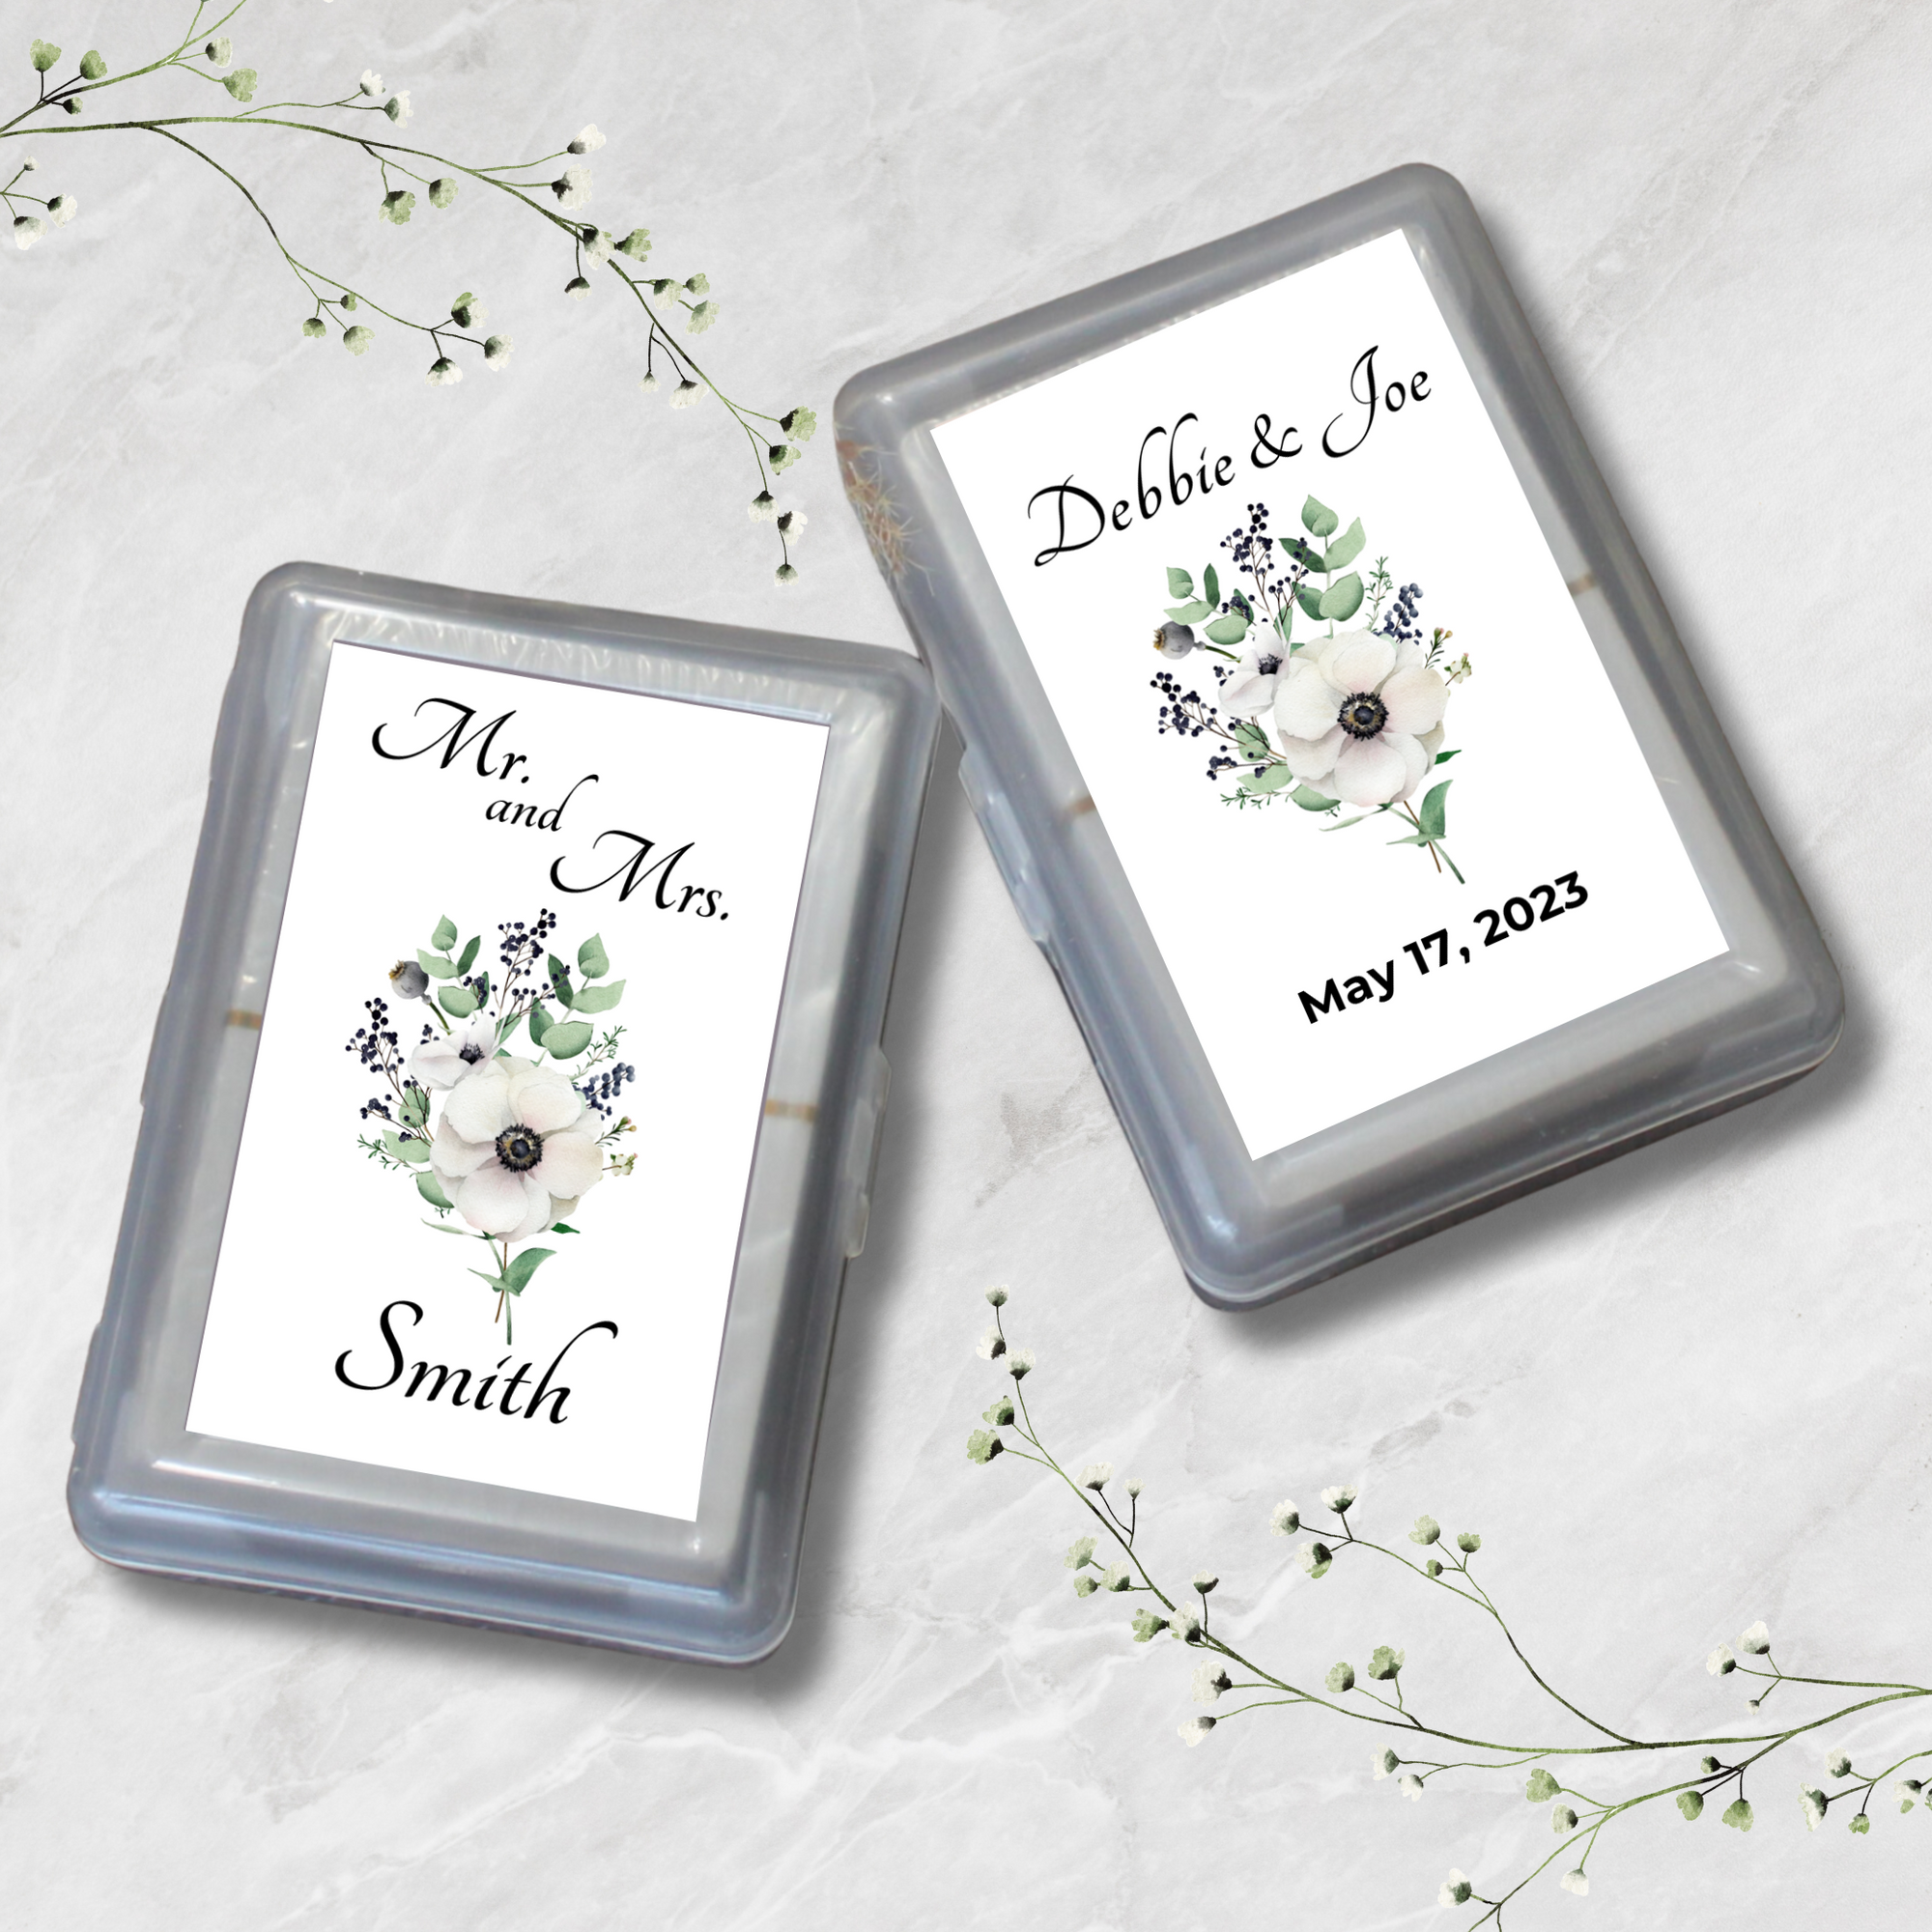 Blossom Together Playing Card Favors